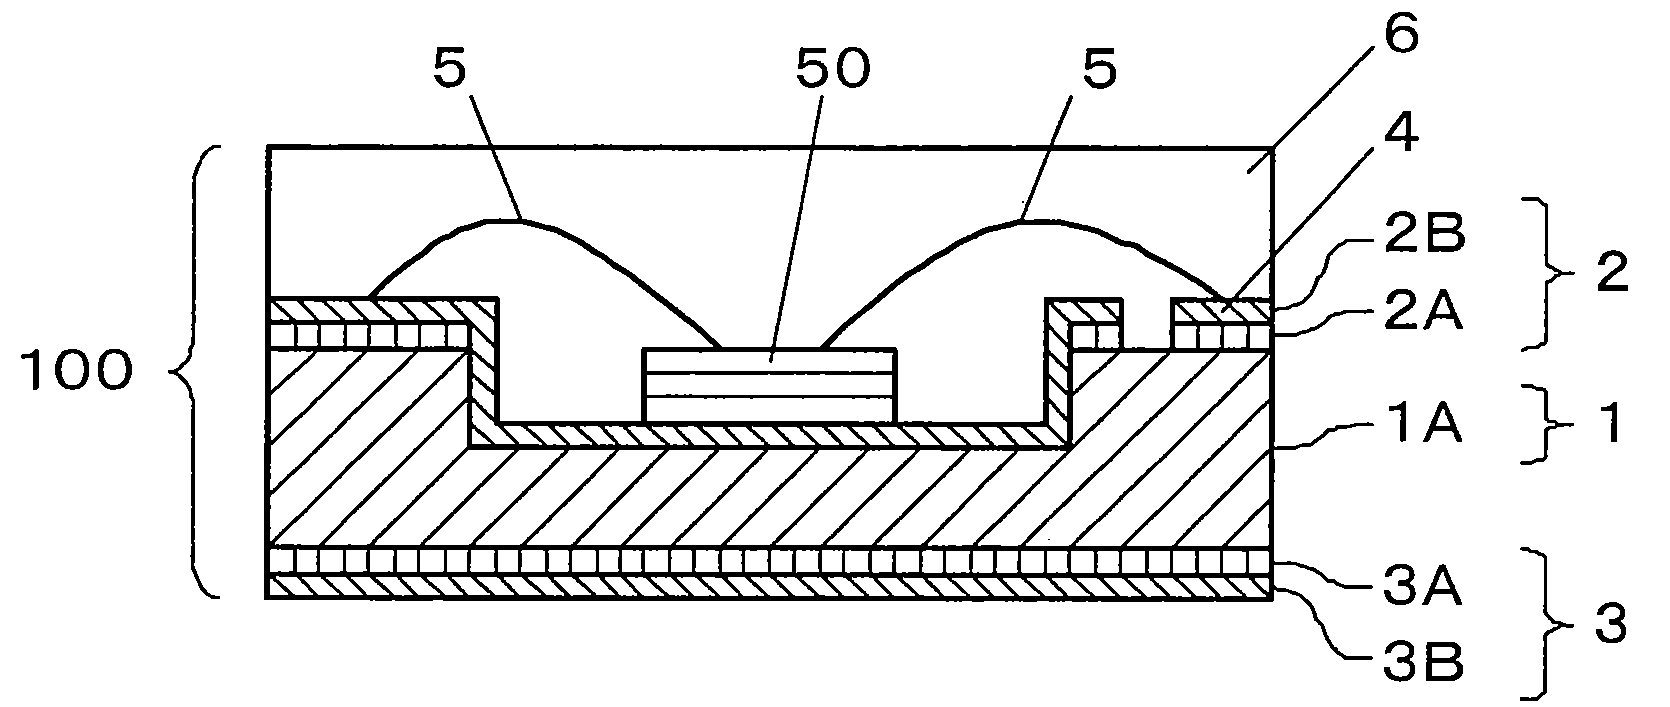 Substrate applicable in chip LED package